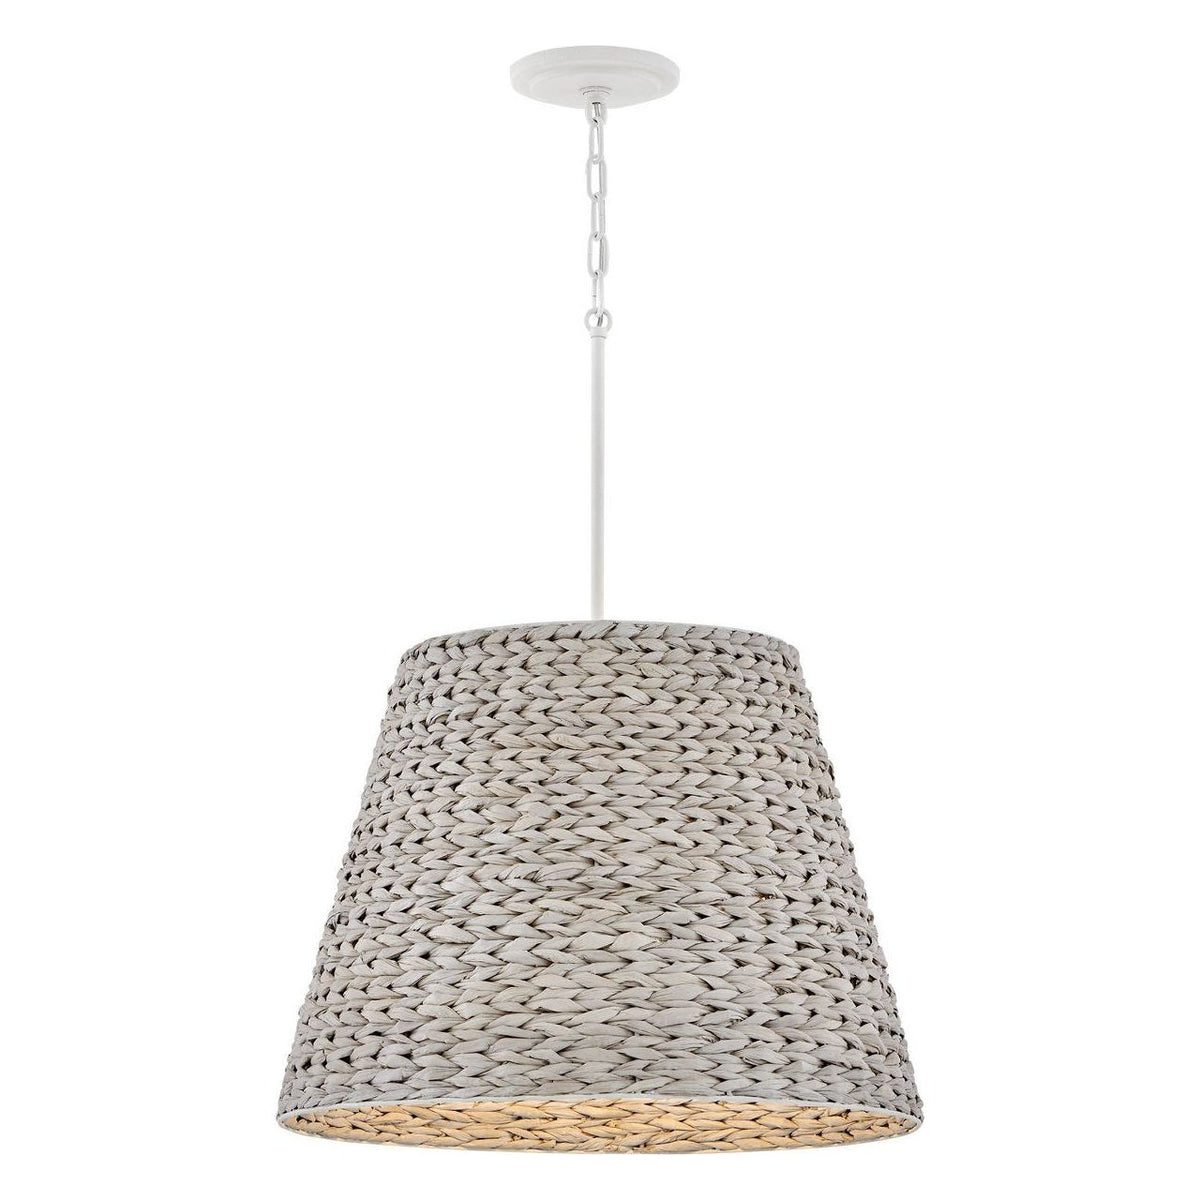 Hinkley Canada - 43224TXP - LED Chandelier - Seabrook - Textured Plaster